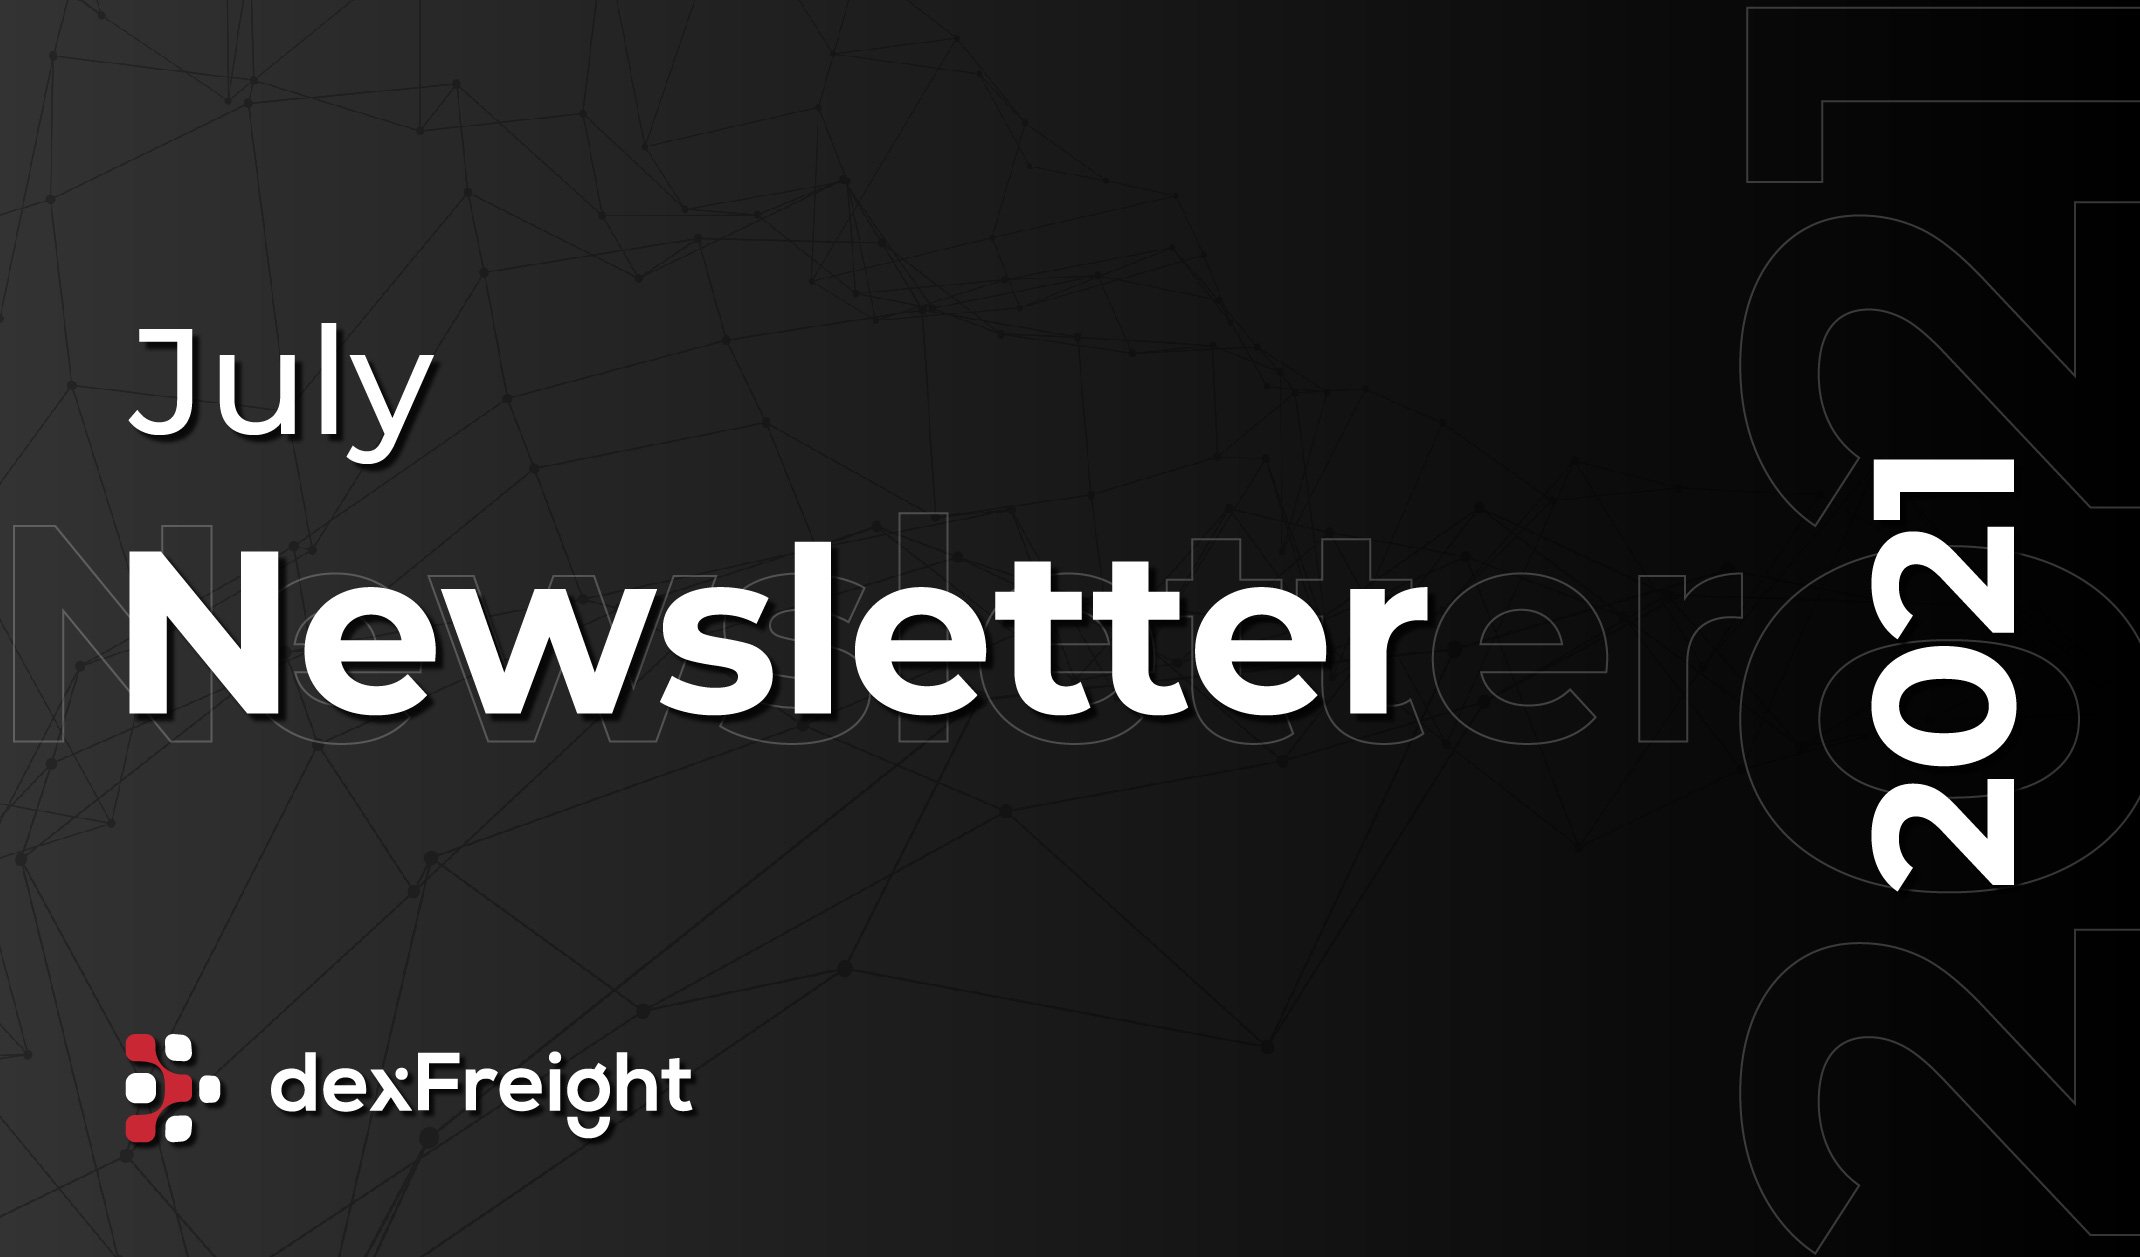 dexFreight Newsletter July 2021 Updates and Announcements